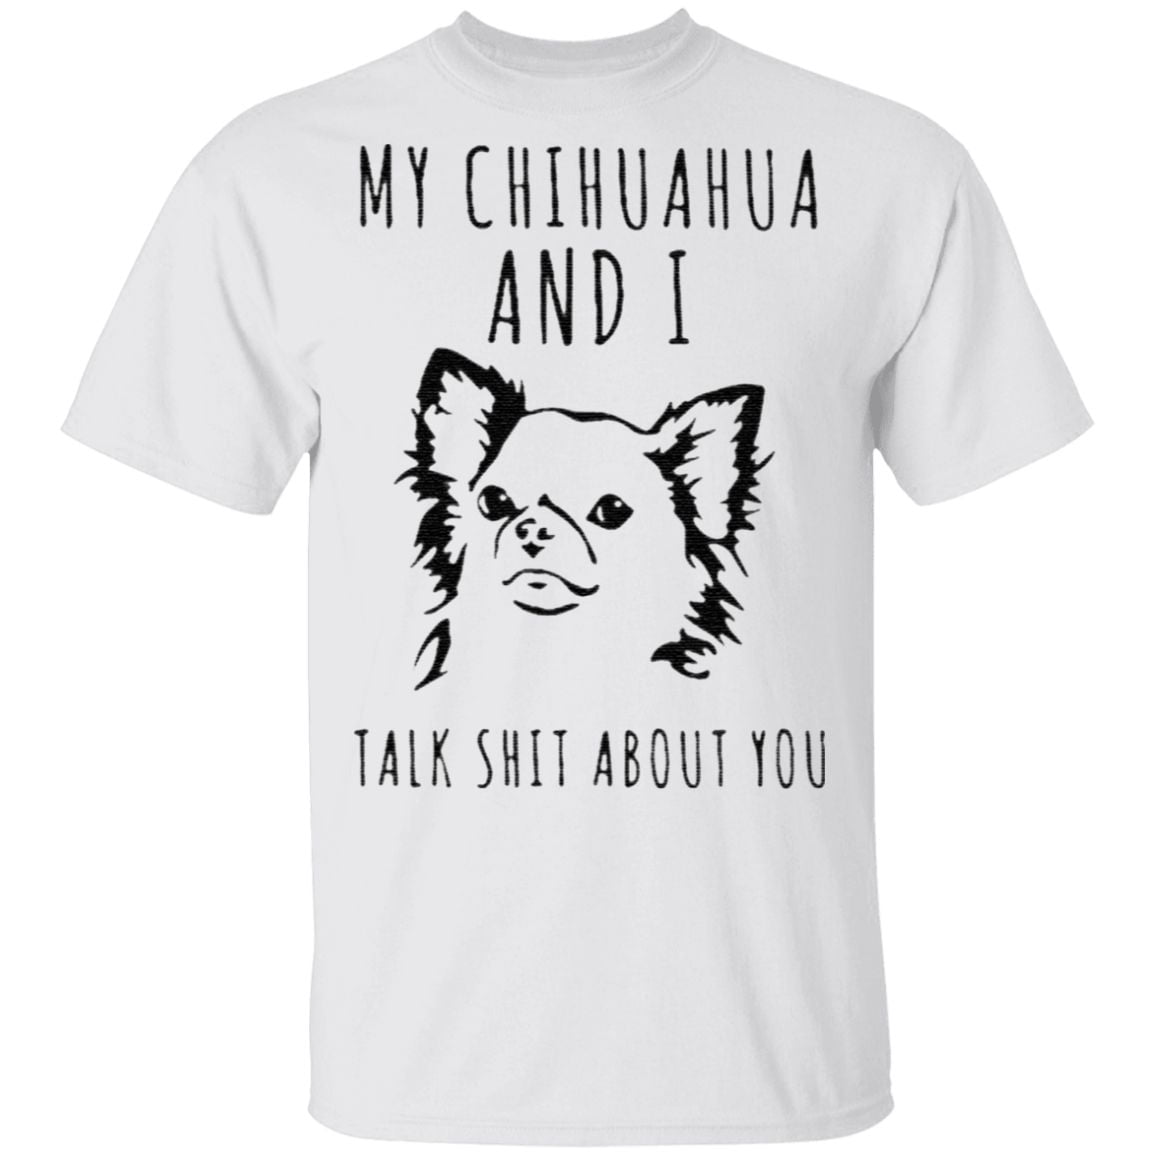 My chihuahua and I talk shit about you shirt